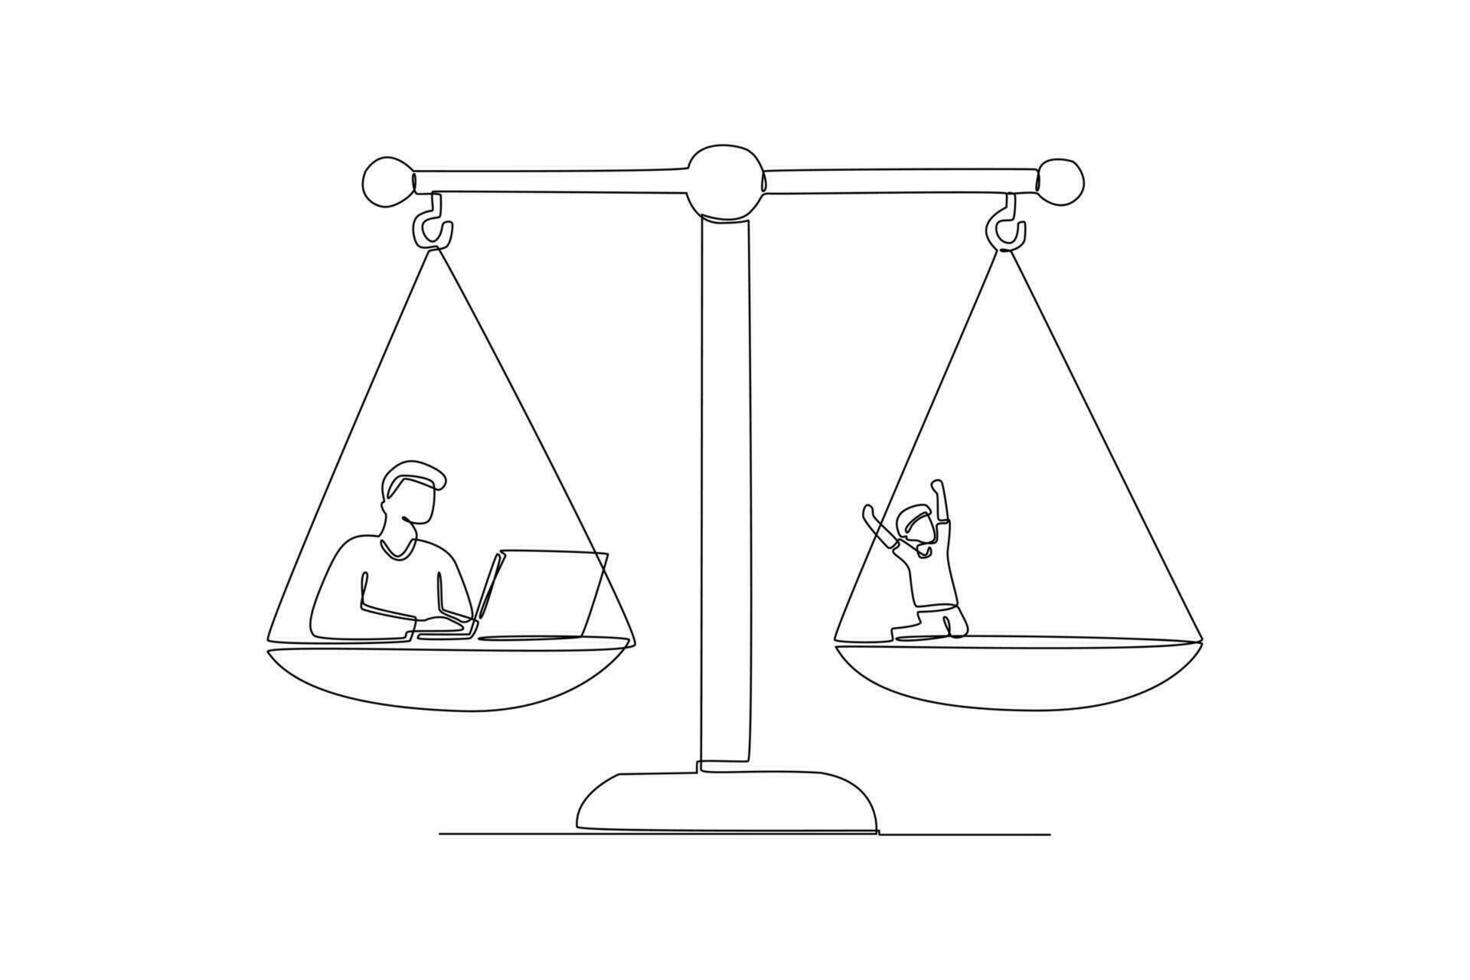 One continuous line drawing of work life balance concept. Doodle vector illustration in simple linear style.